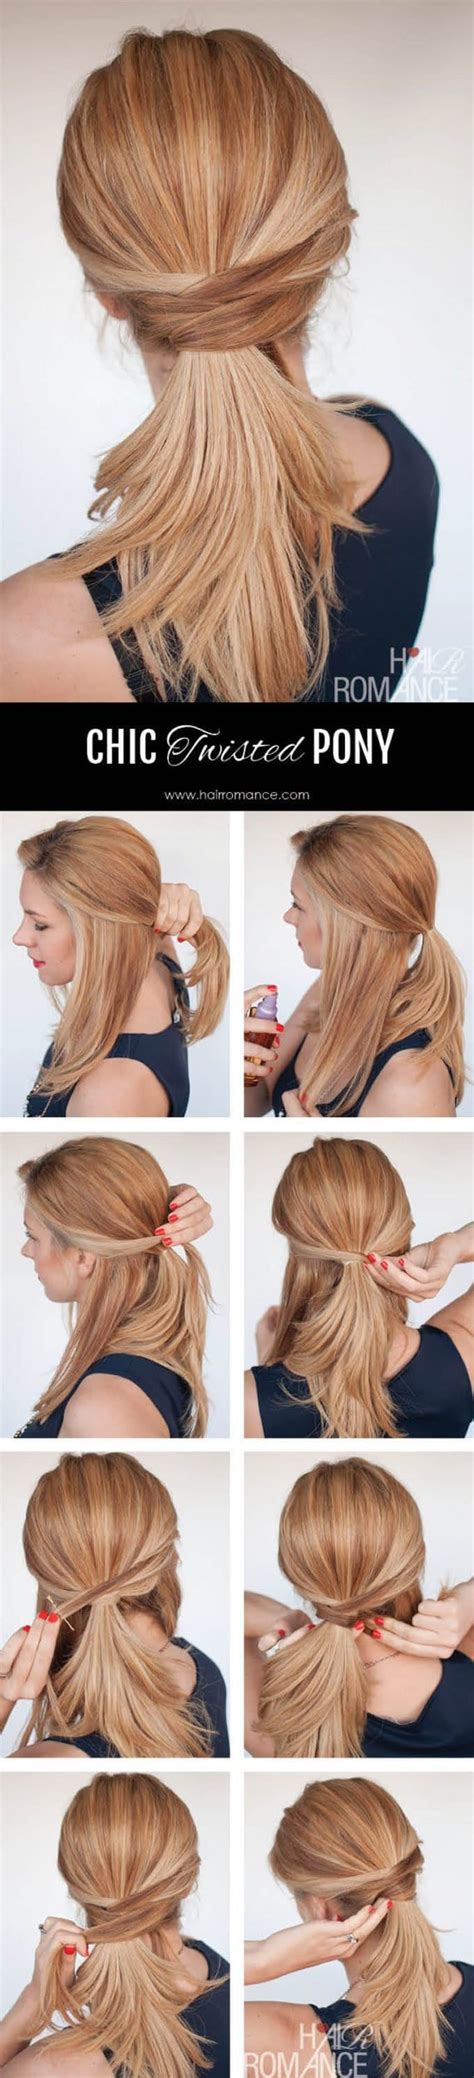 Easy Step By Step Hairstyle Tutorials You Can Do In Less Than 5 Minutes